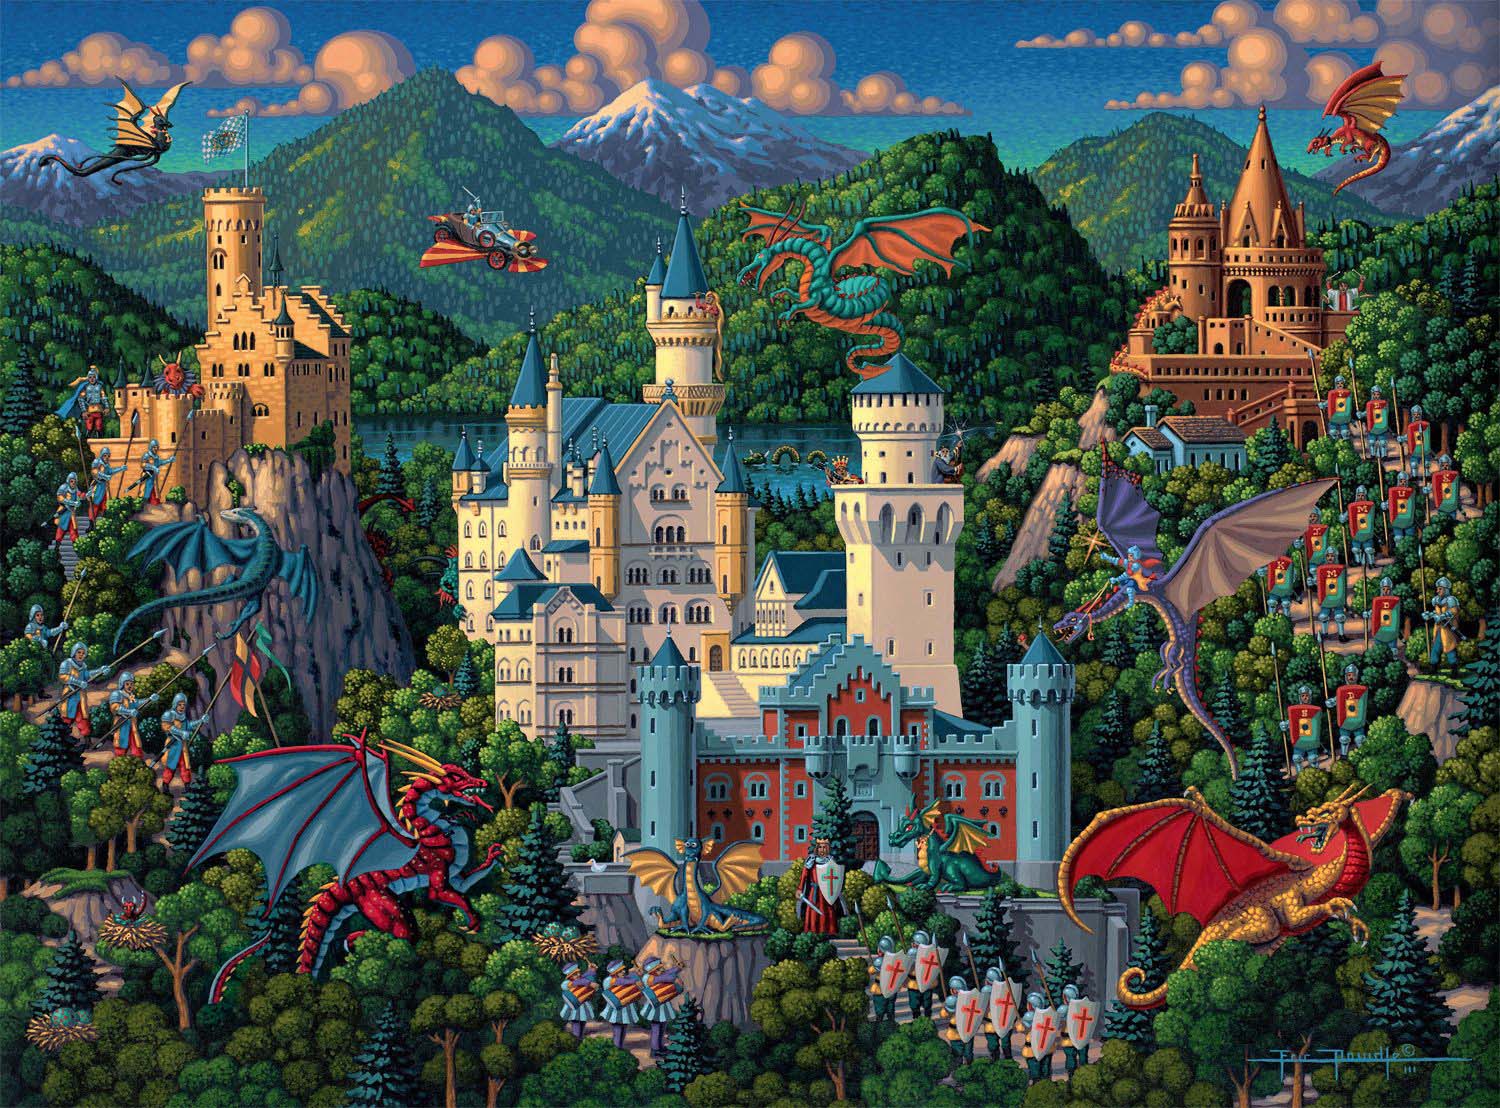 Imaginary Dragons Castle Jigsaw Puzzle